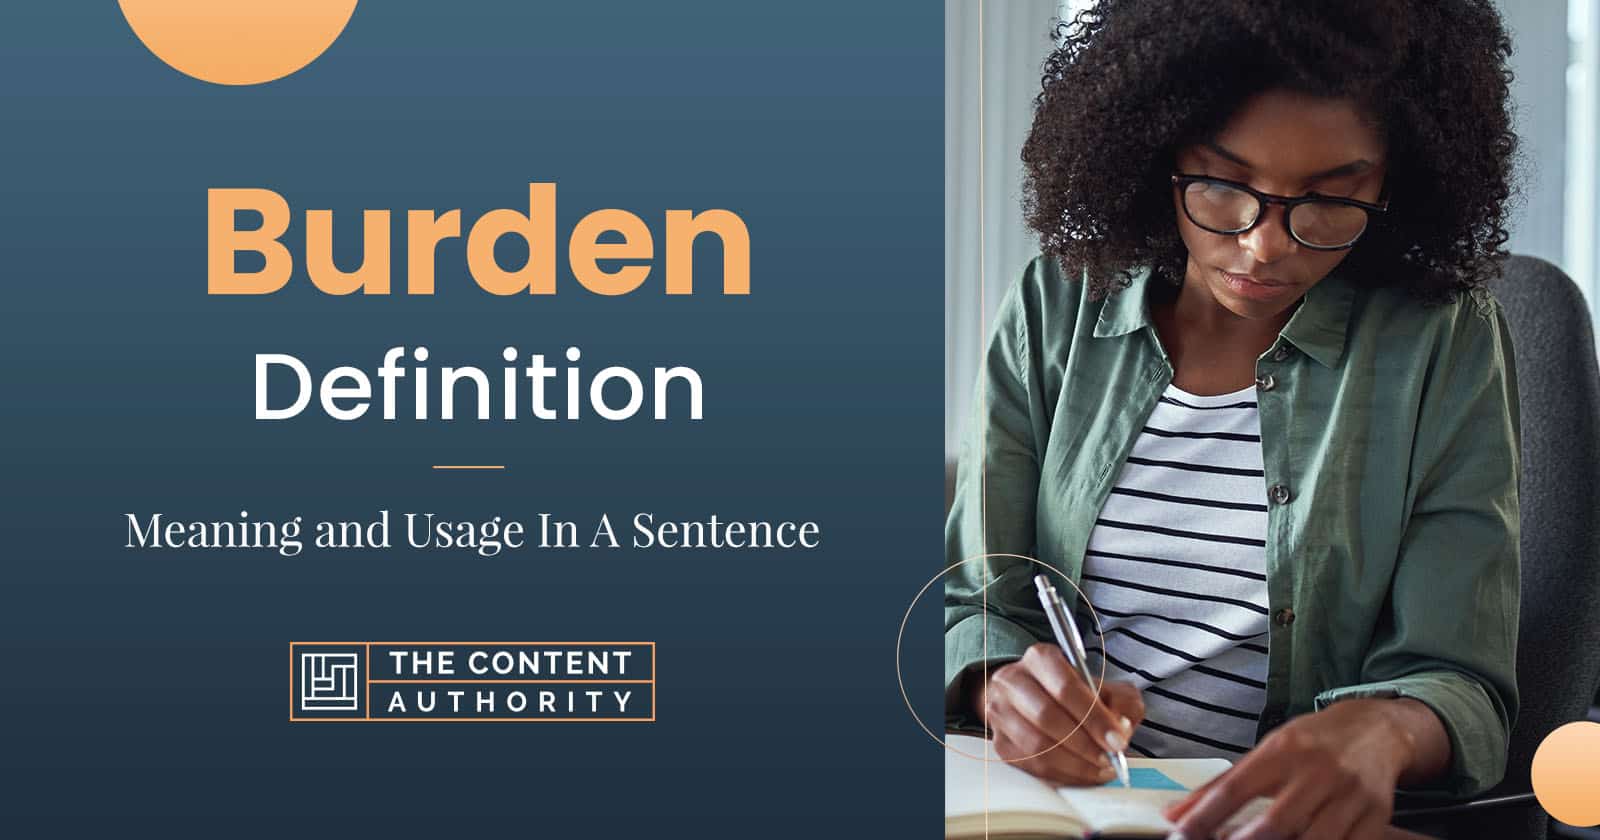 Burden Definition – Meaning and Usage in a Sentence